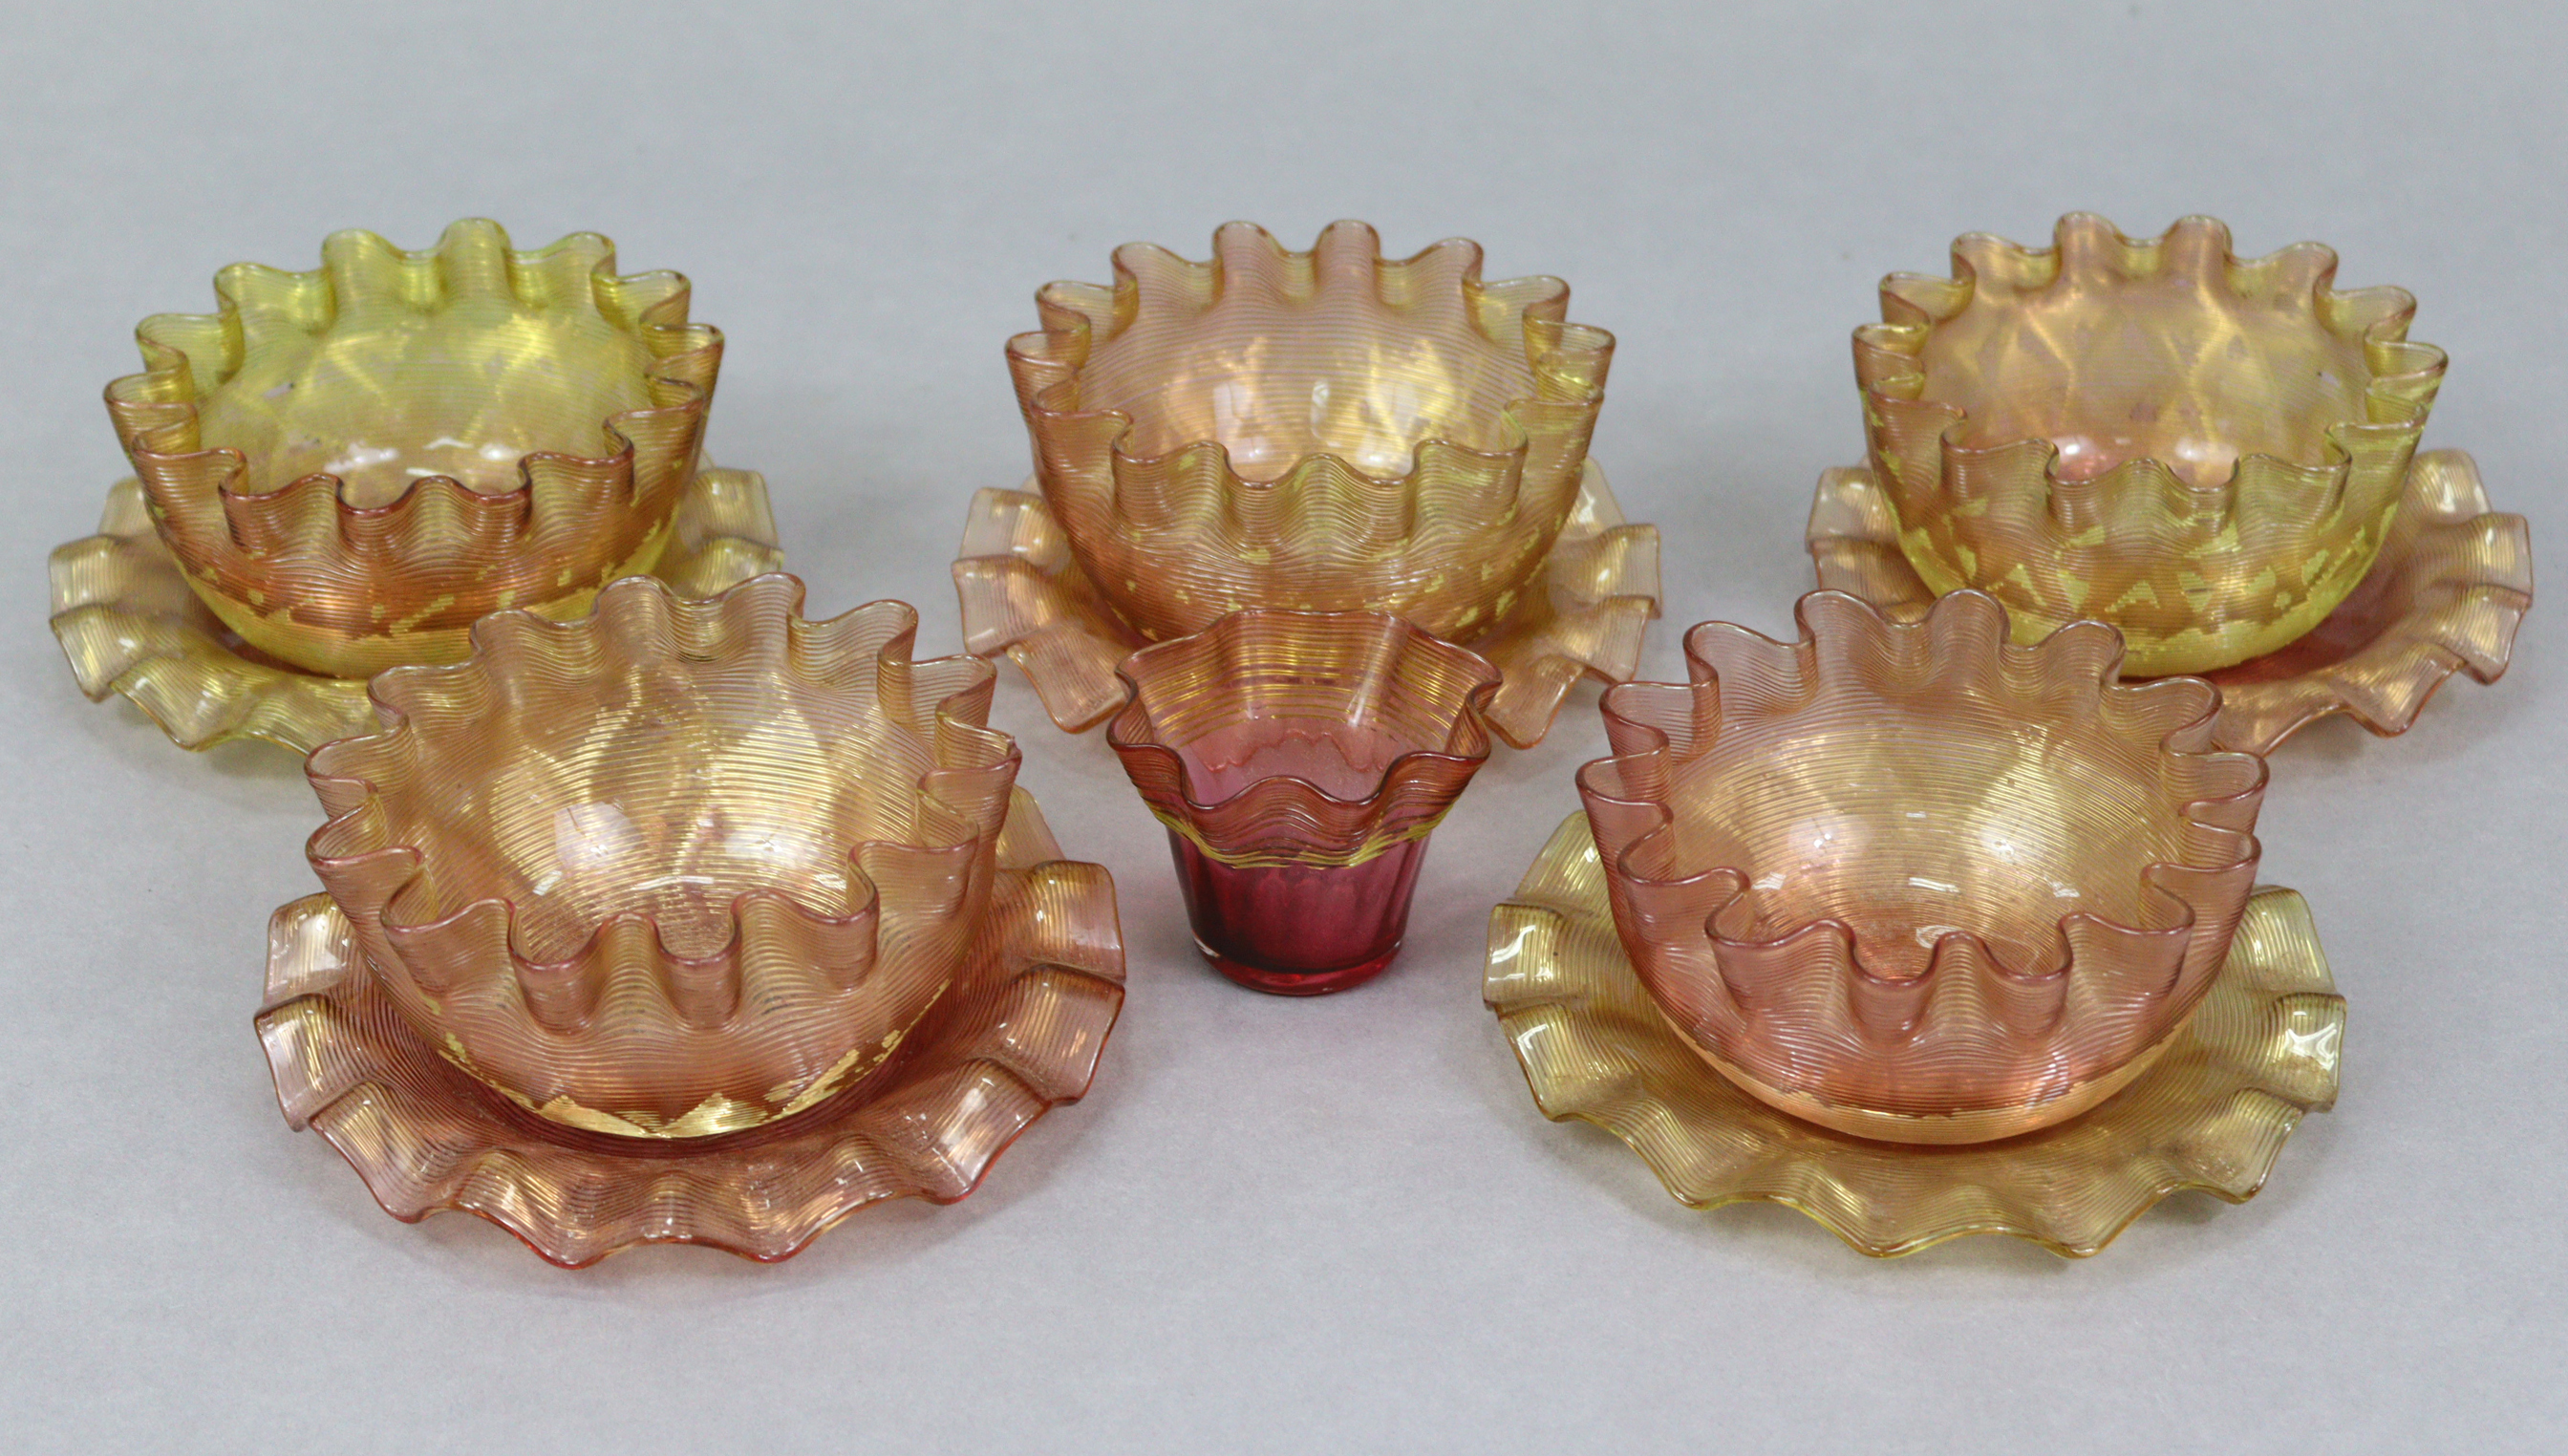 A set of five Venetian glass bowls, 5” diam., each with stand; & a similar smaller bowl.